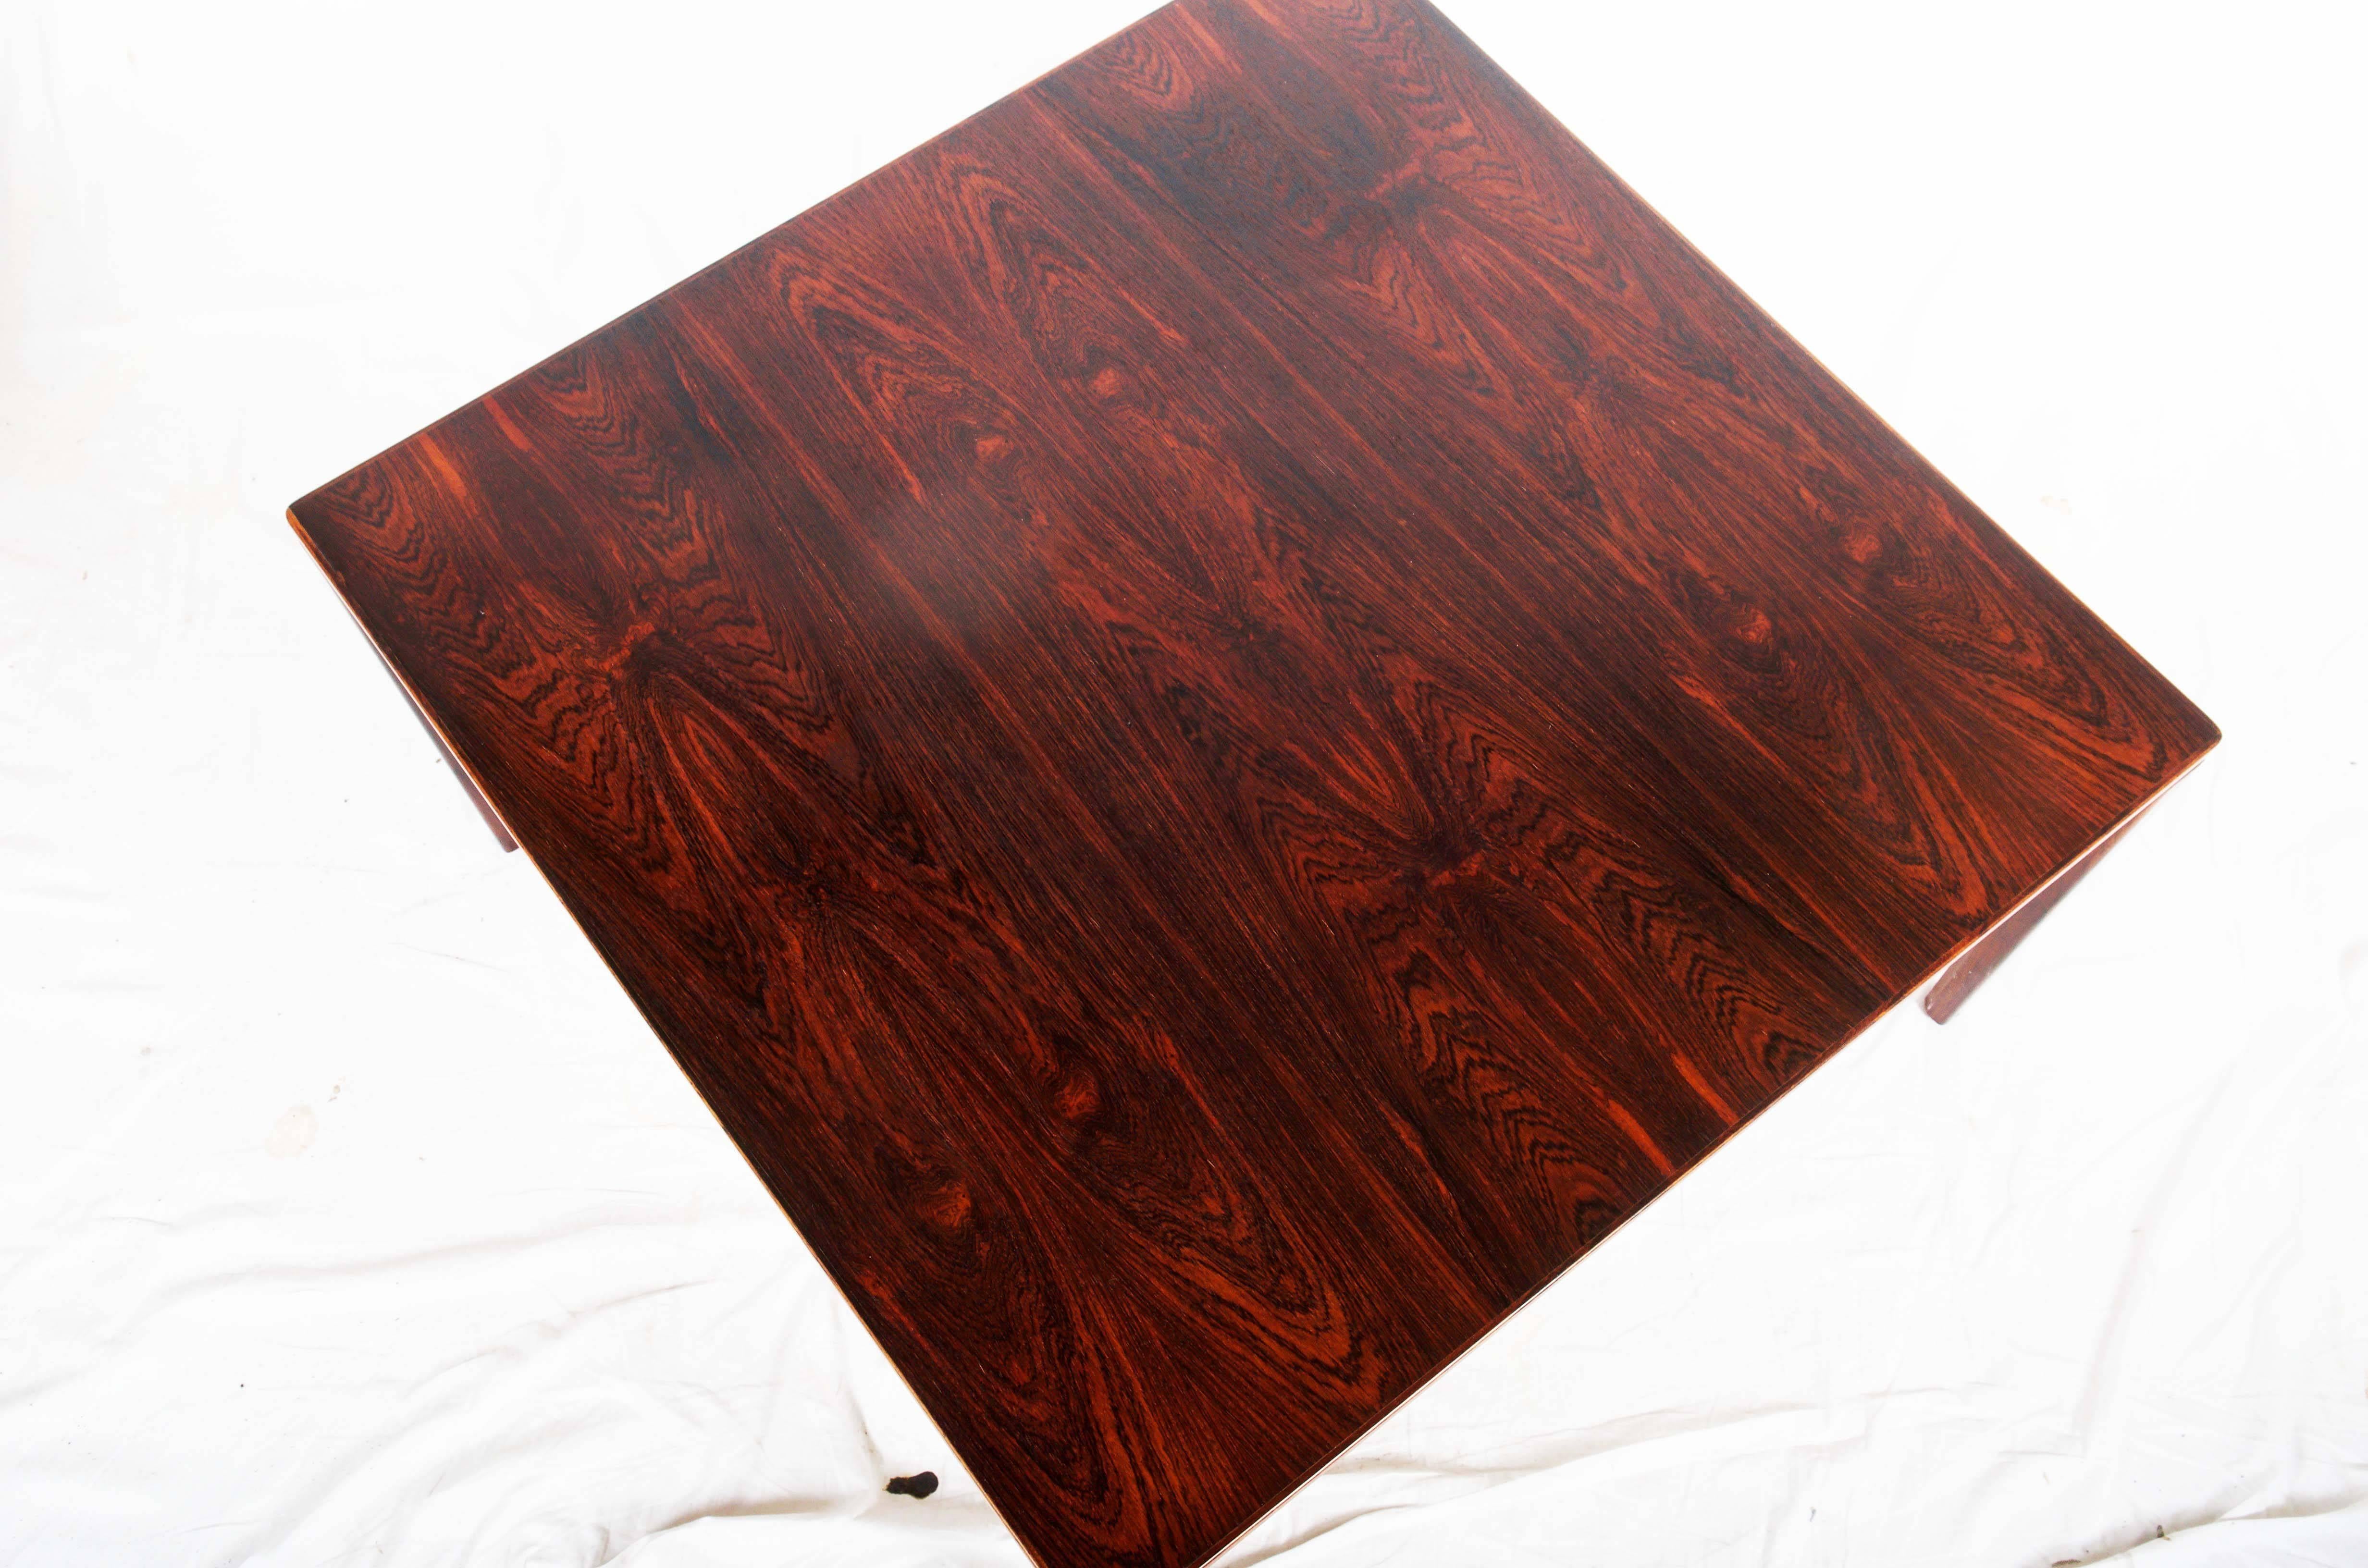 Solid hardwood with hardwood veneer, made in Sweden in the 1960s, signed ST.